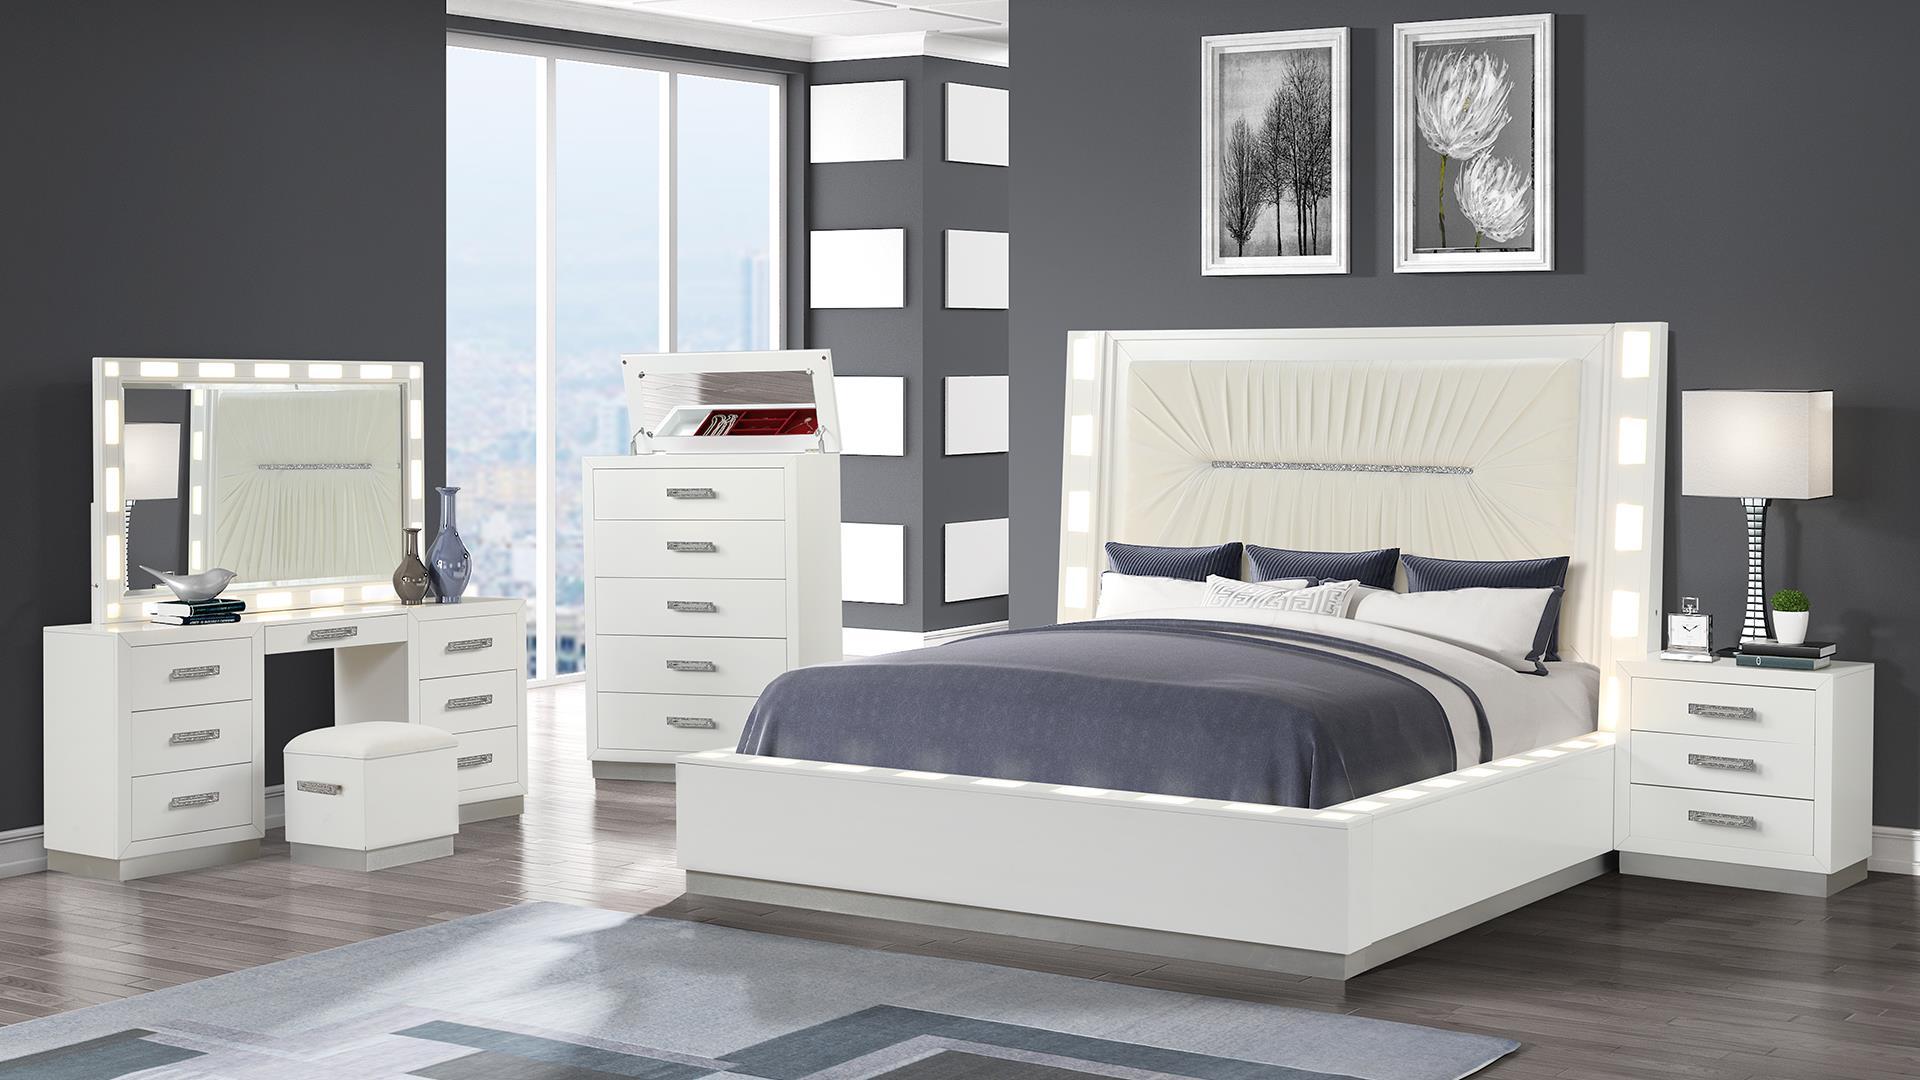 Contemporary, Modern Platform Bedroom Set COCO-Q-BED-NVS-4PC COCO-EK-BED-NVS-4PC in White 